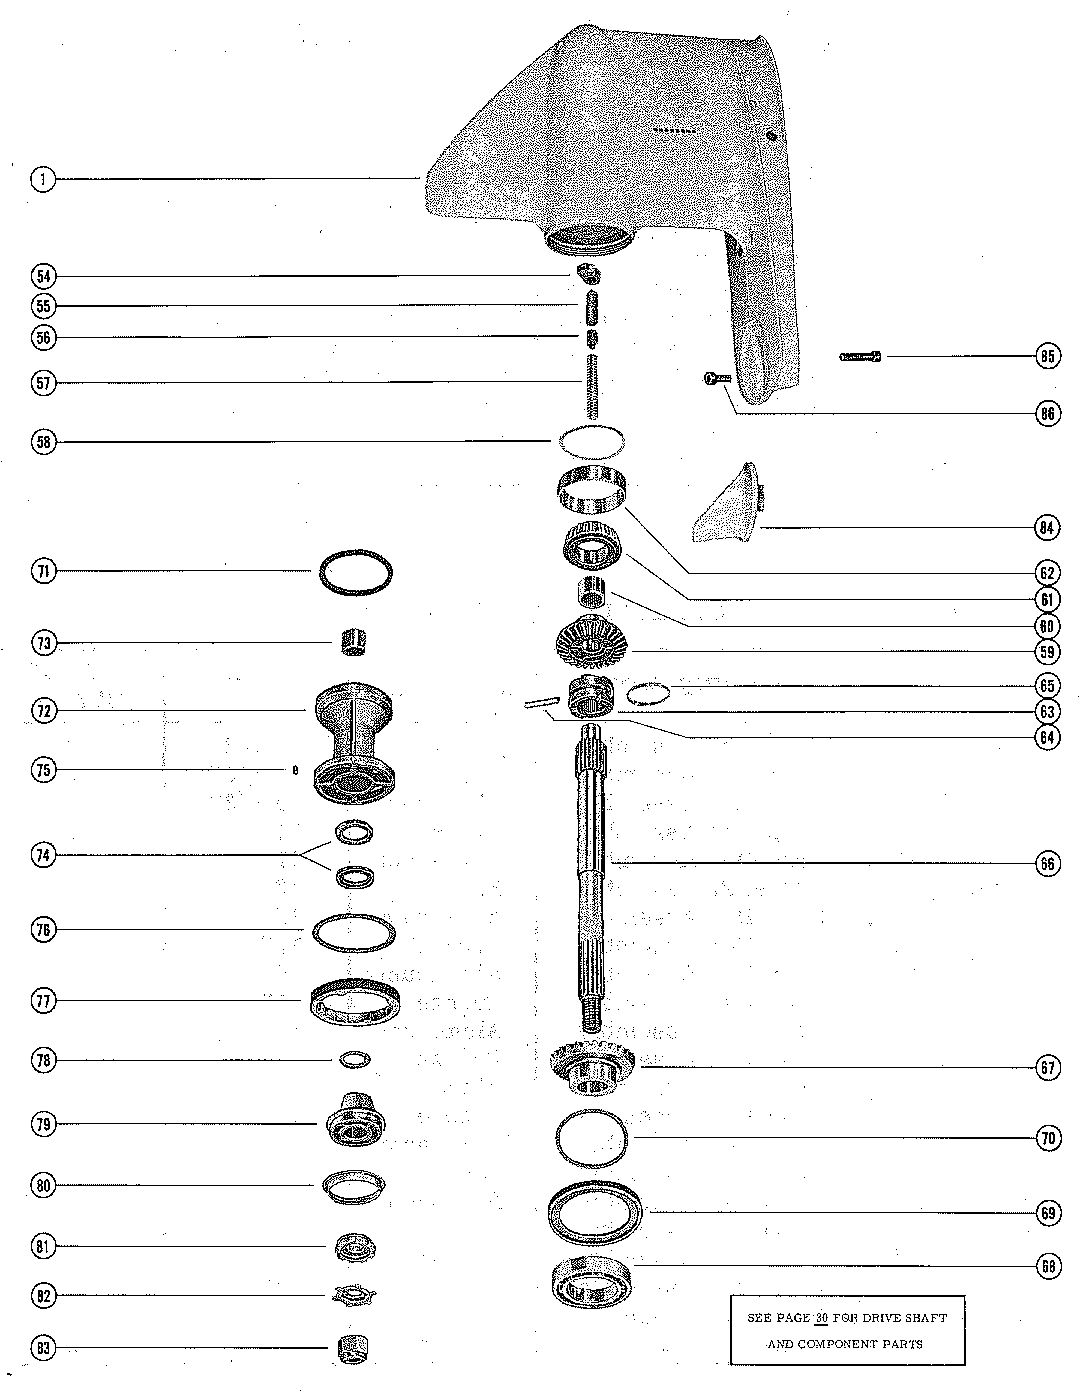 MERCURY MERC 1000E-2 GEAR HOUSING ASSEMBLY, COMPLETE (PAGE 2)